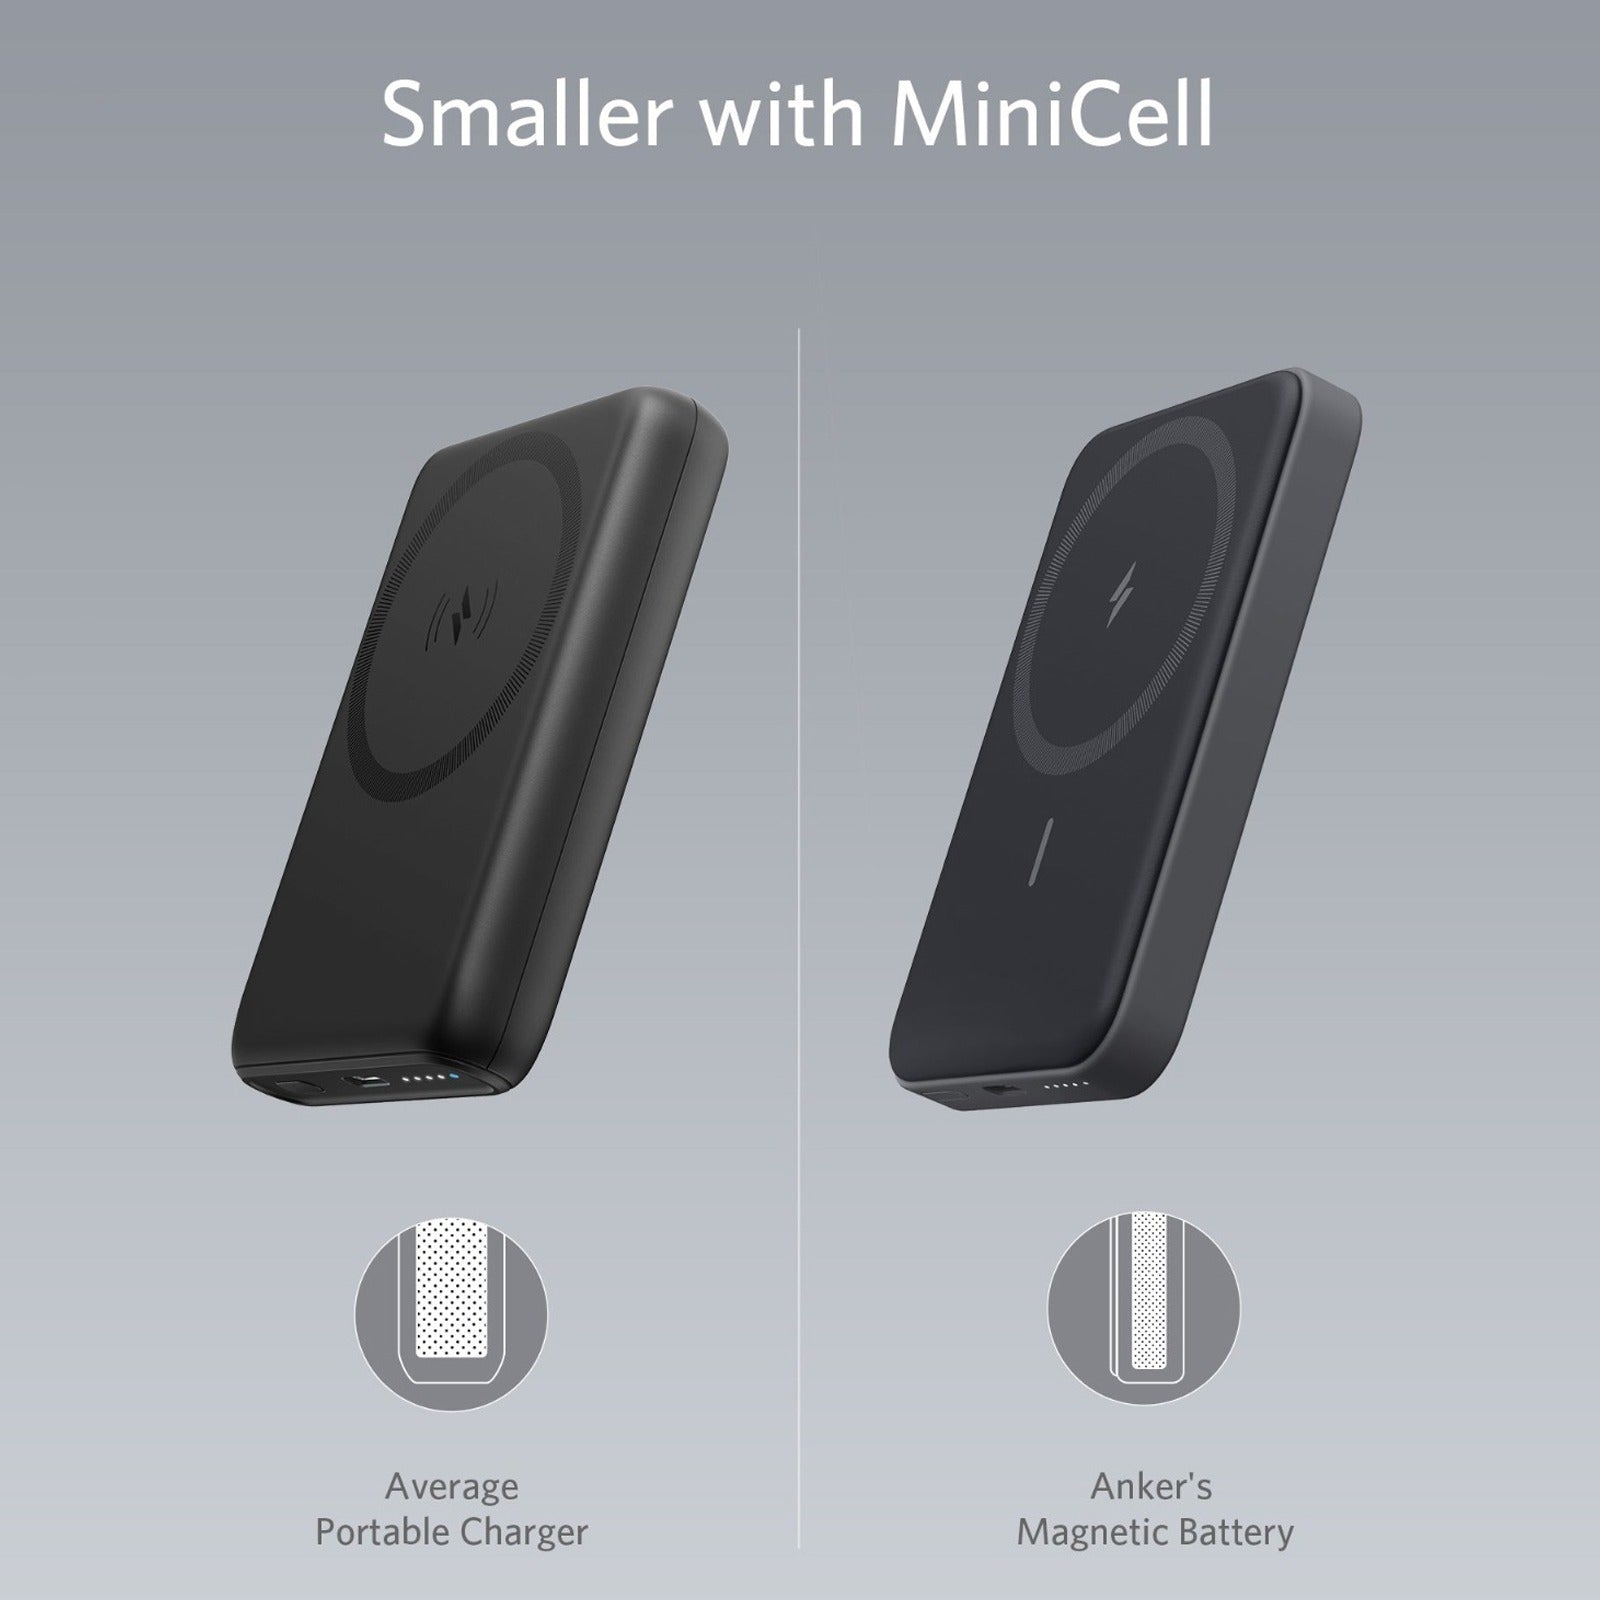 A Wireless Portable Charger with 5000 mAh capacity, compatible with Anker 622 Magnetic Battery